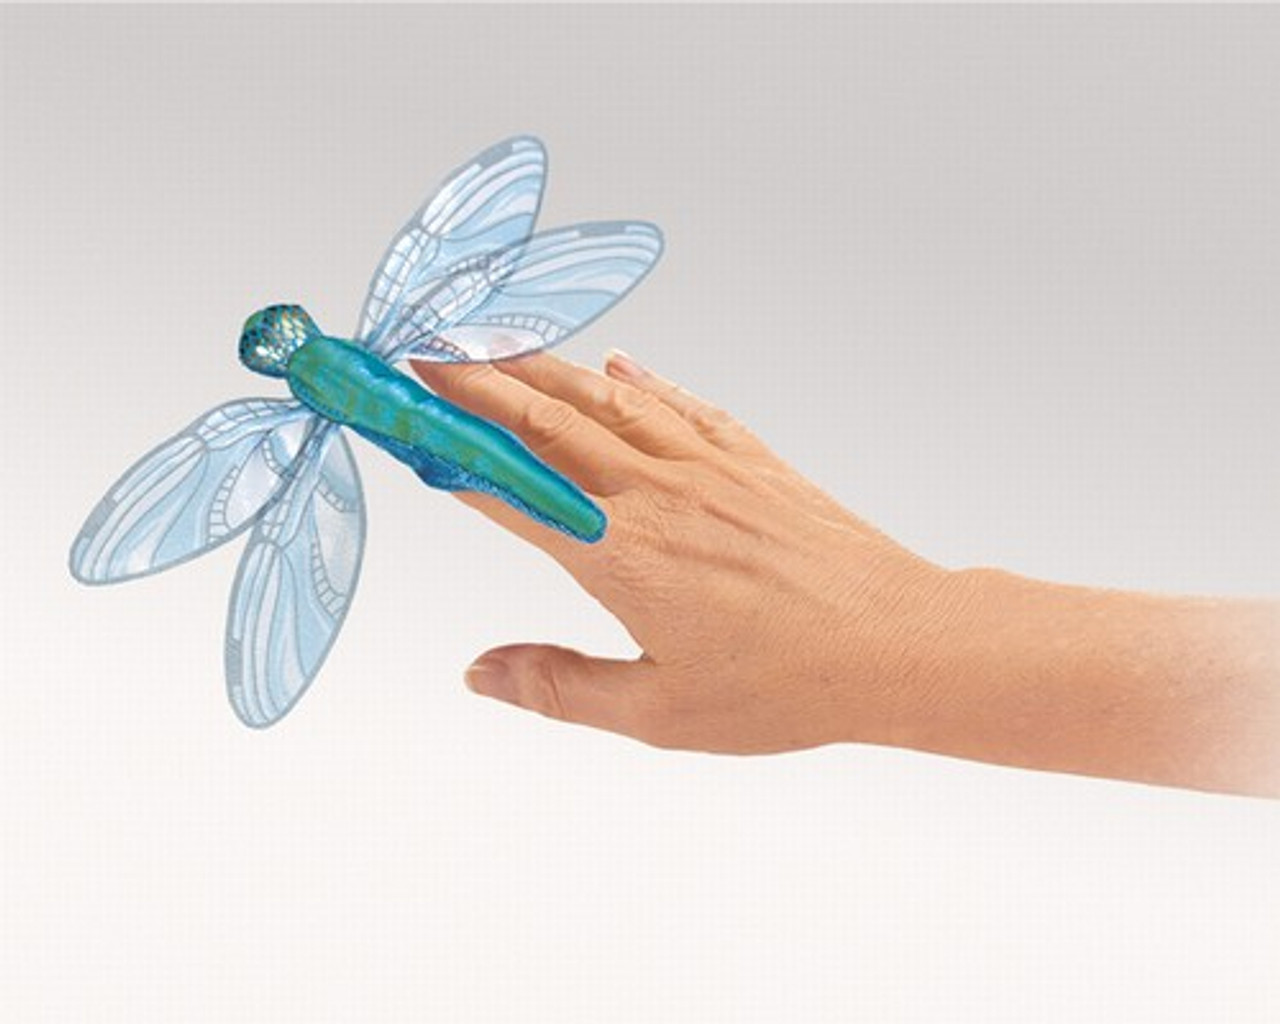 Mini Dragonfly Puppet